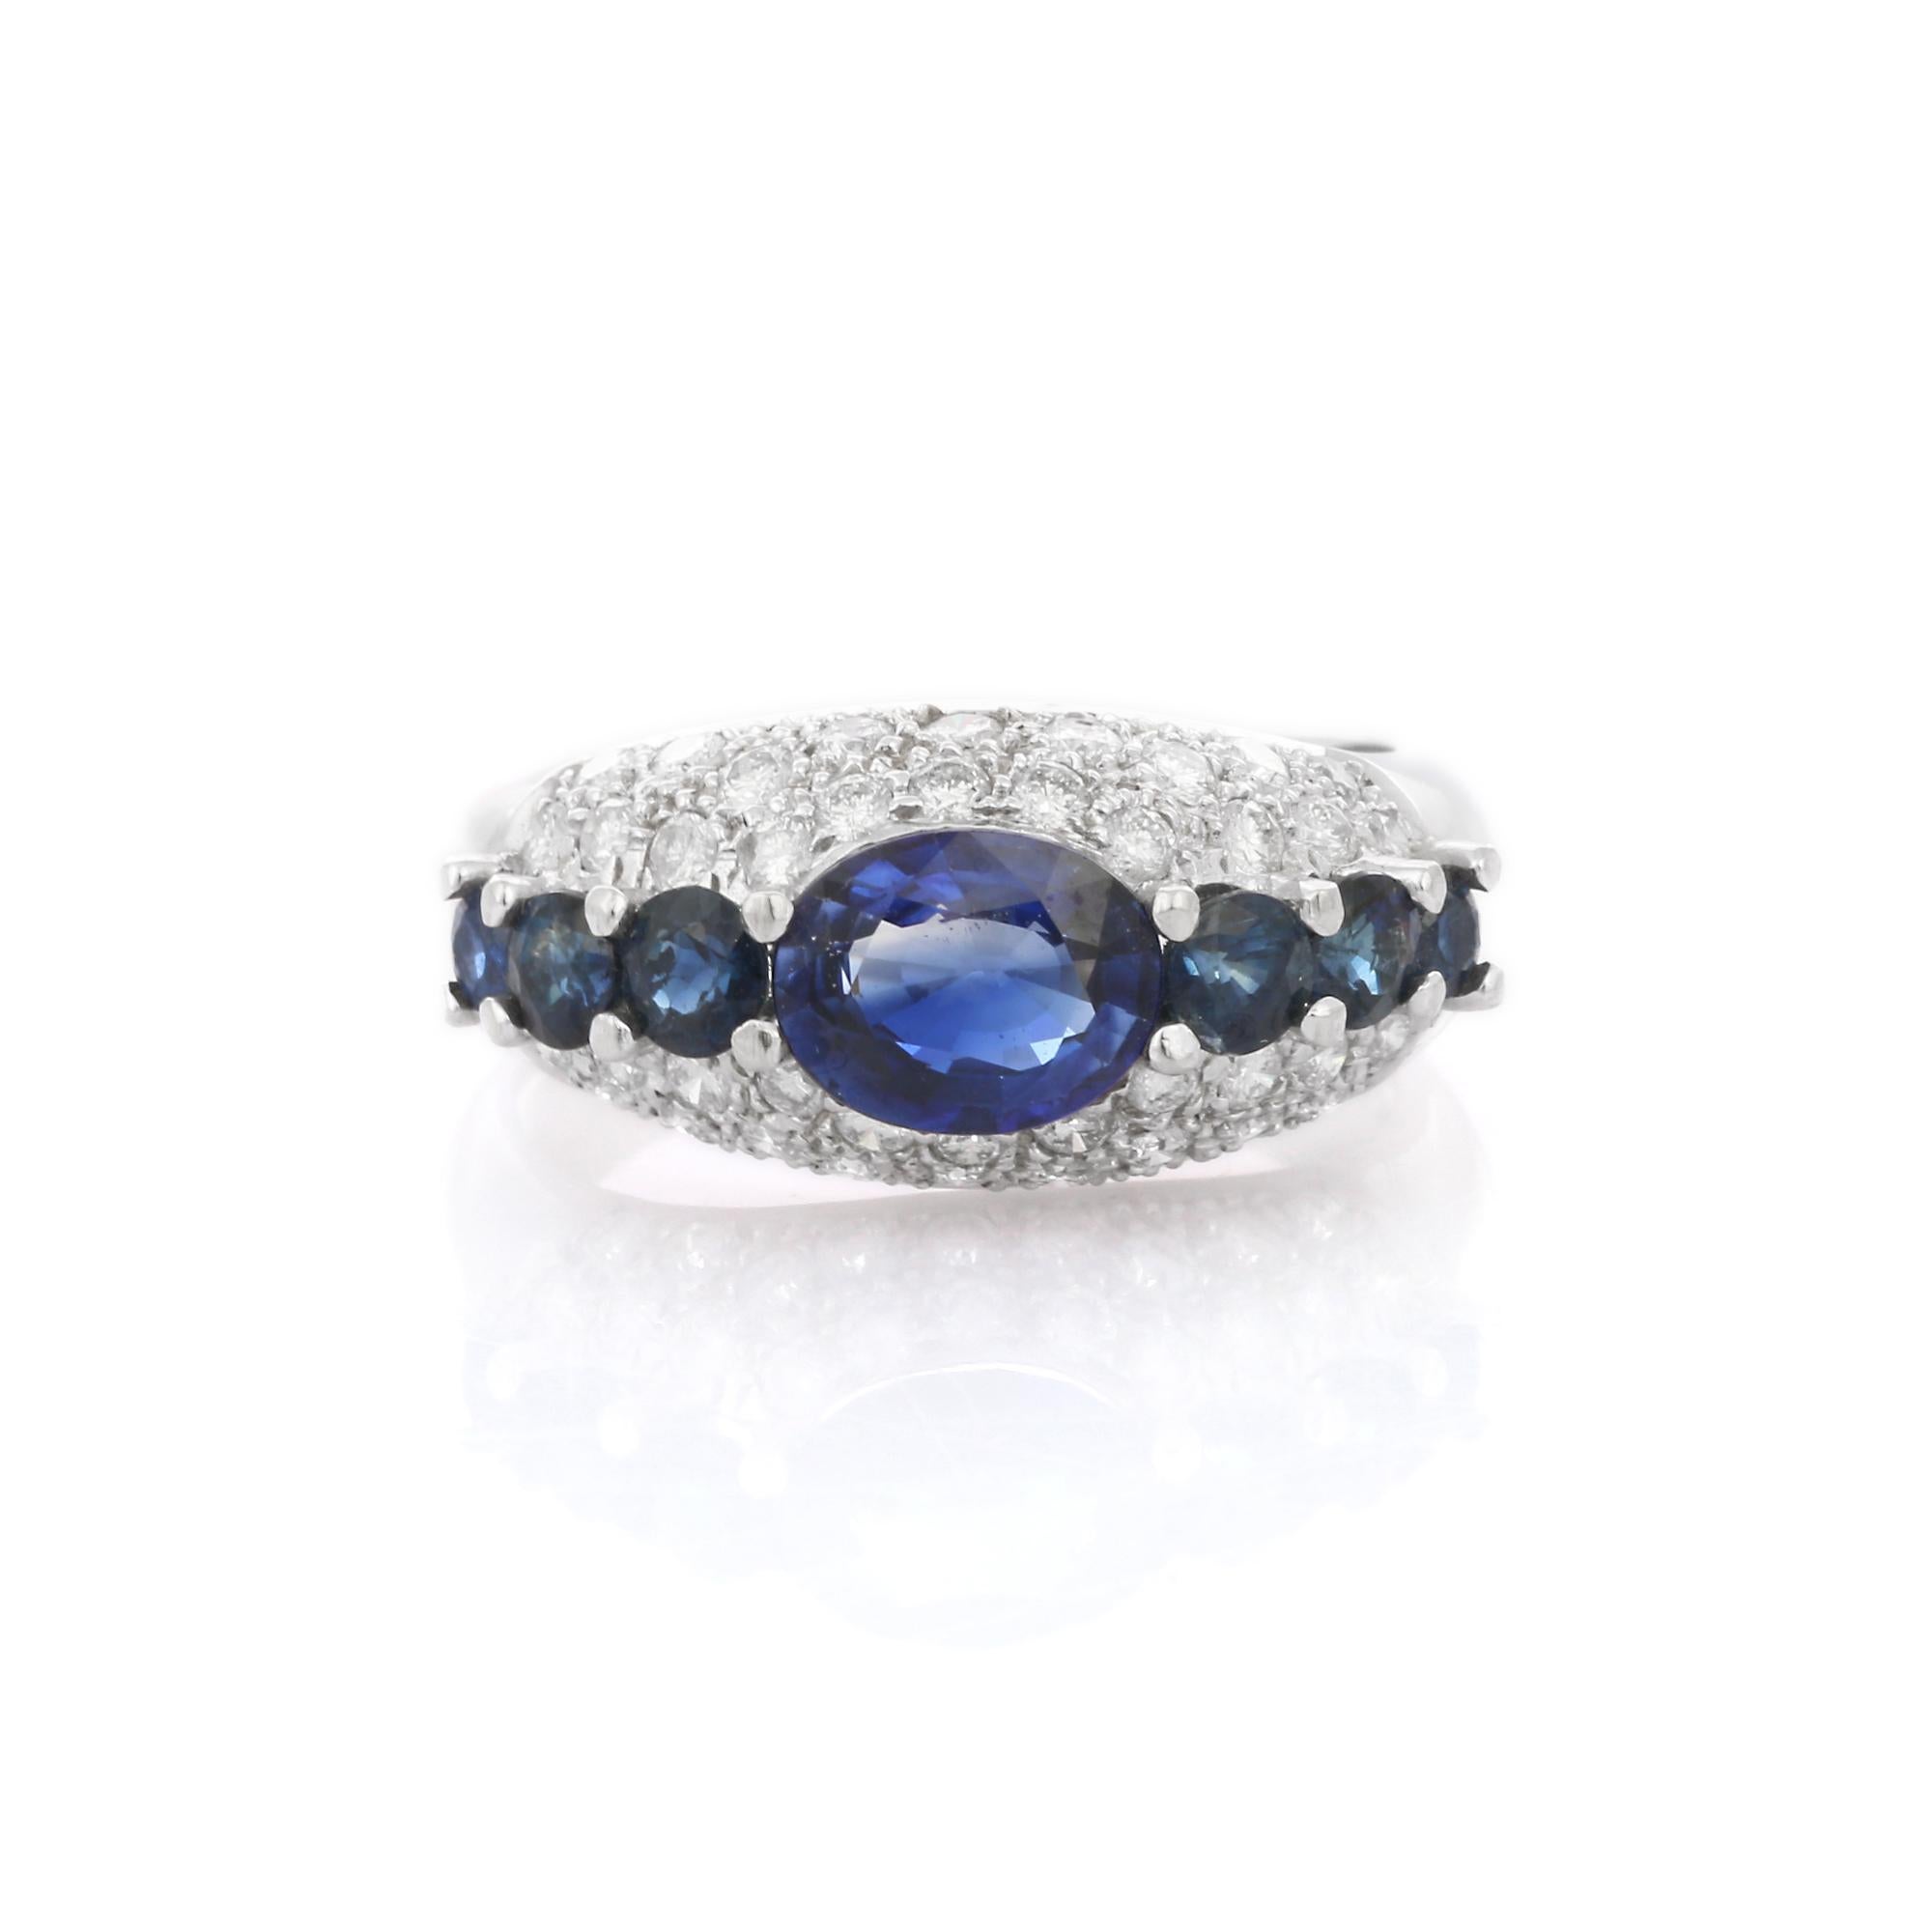 For Sale:  Blue Sapphire Engagement Ring with Diamonds in 18K White Gold 6